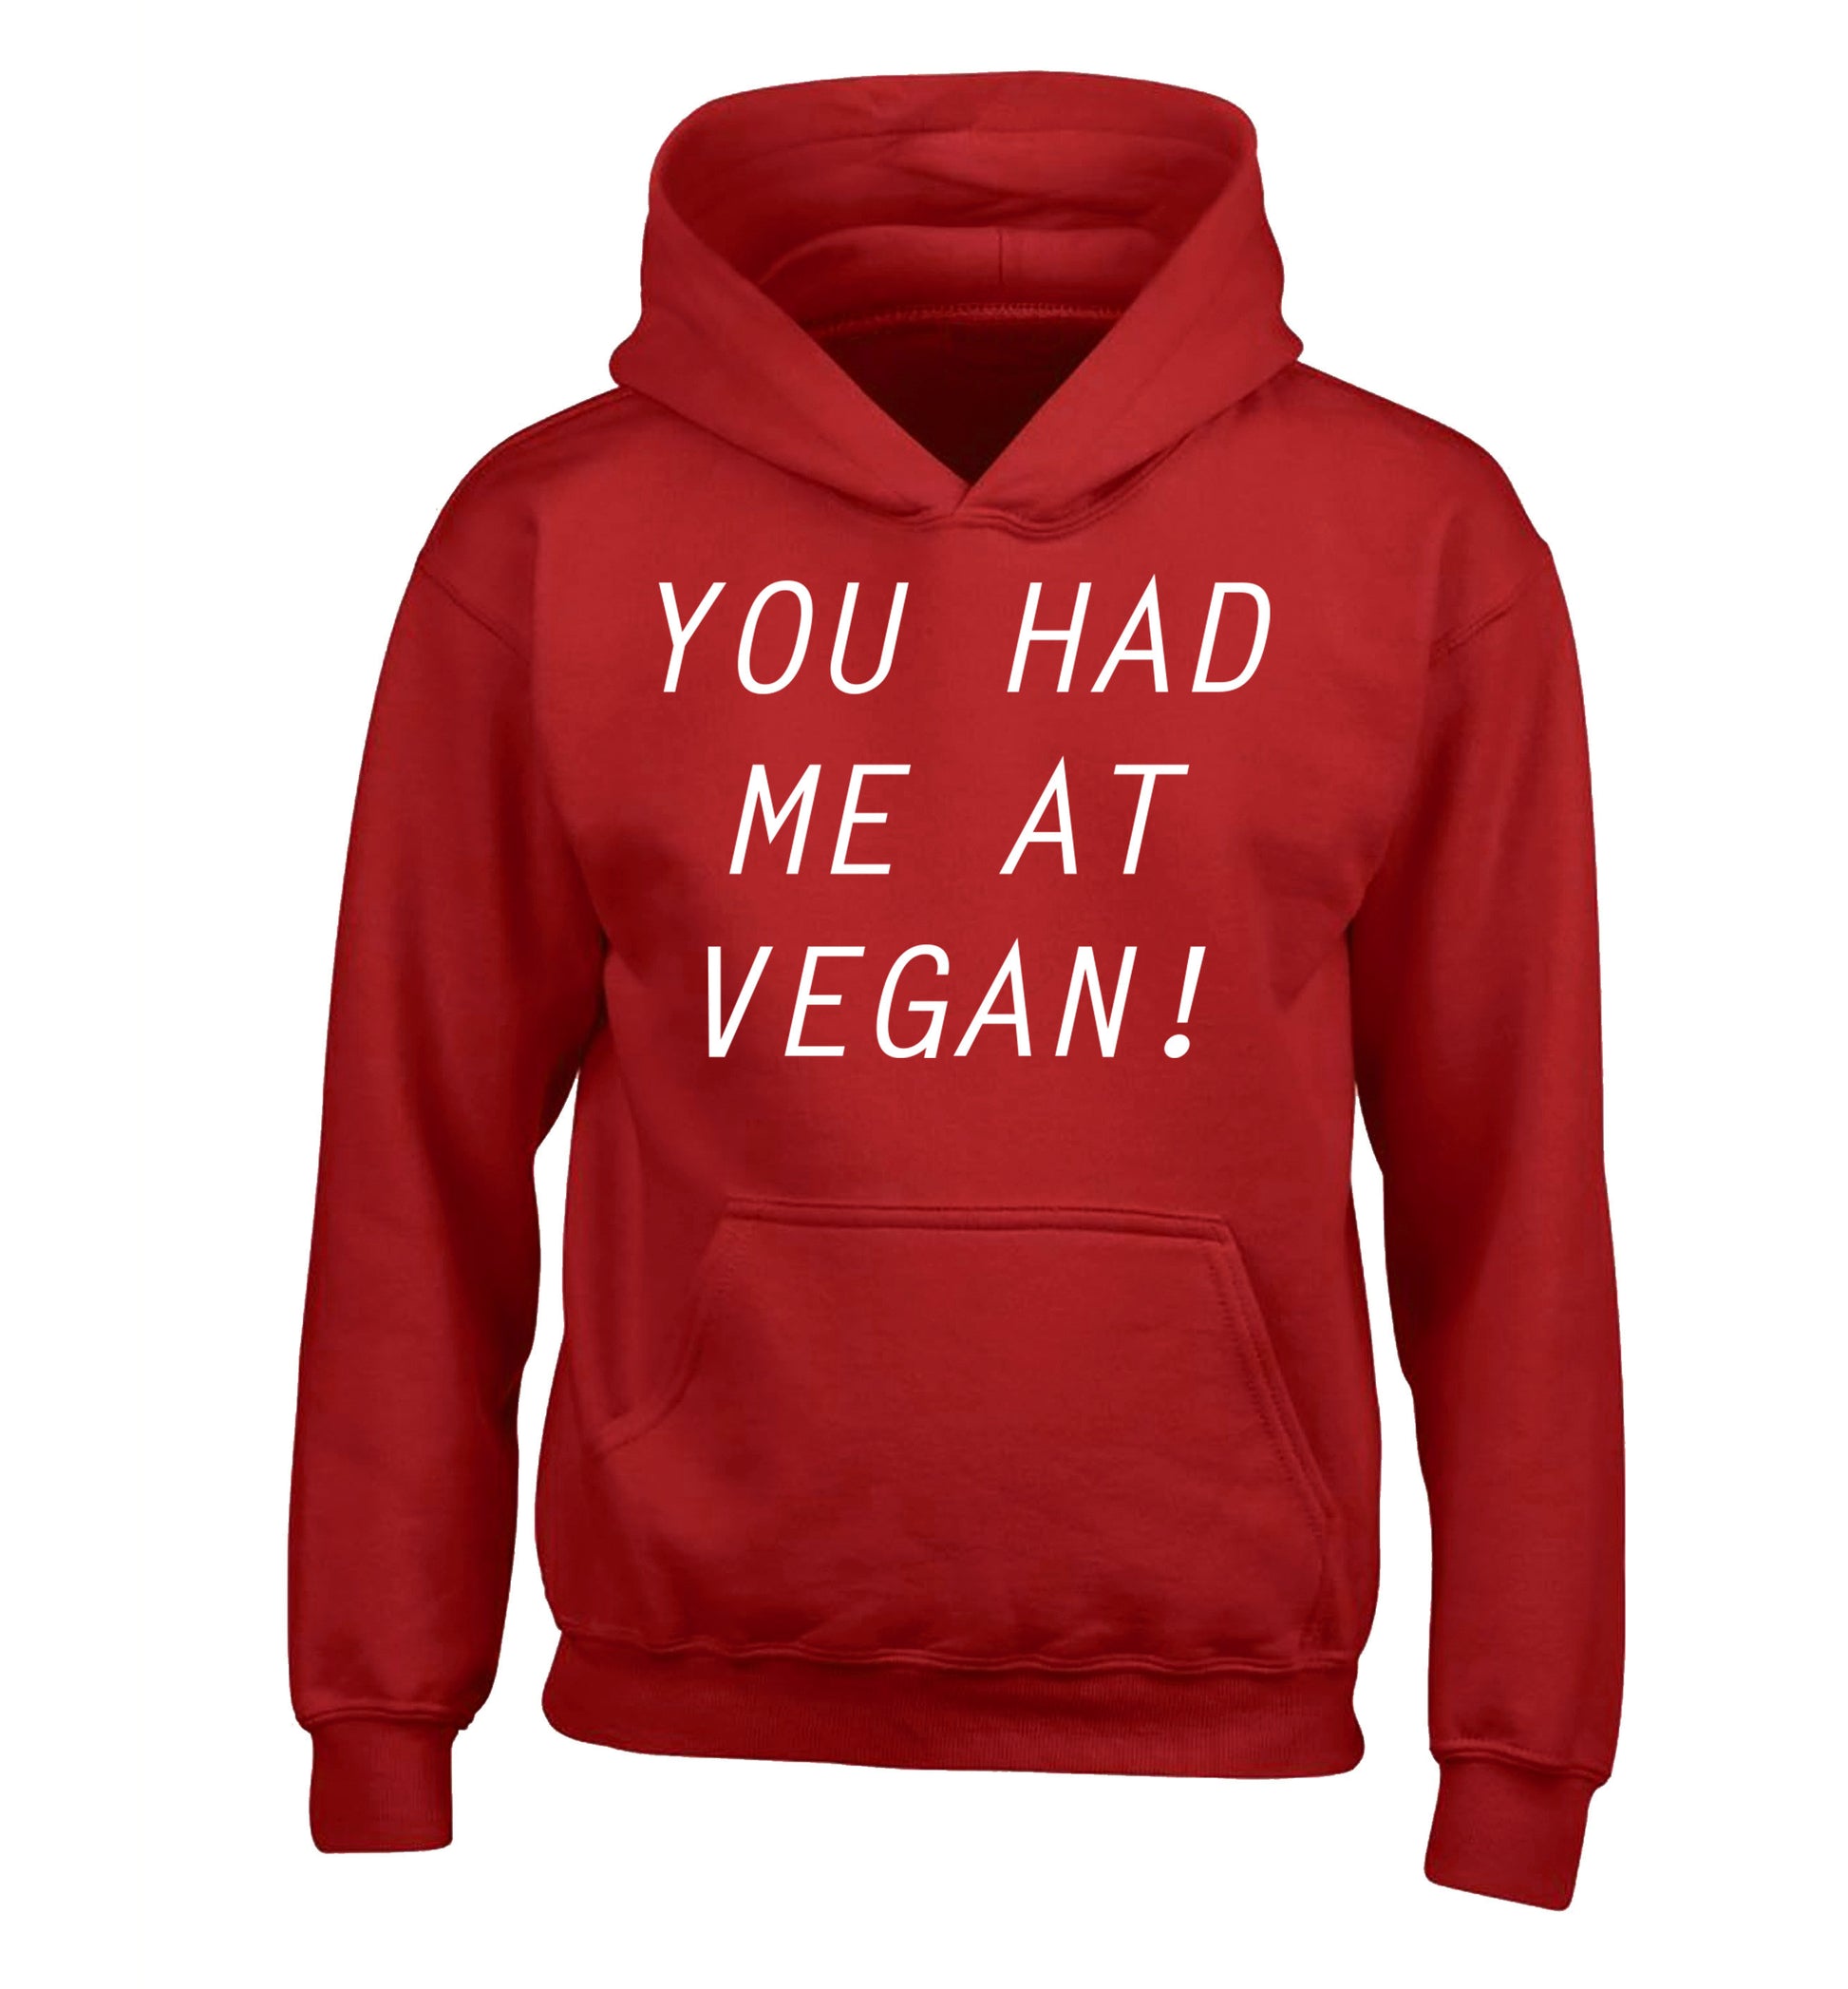 You had me at vegan children's red hoodie 12-14 Years